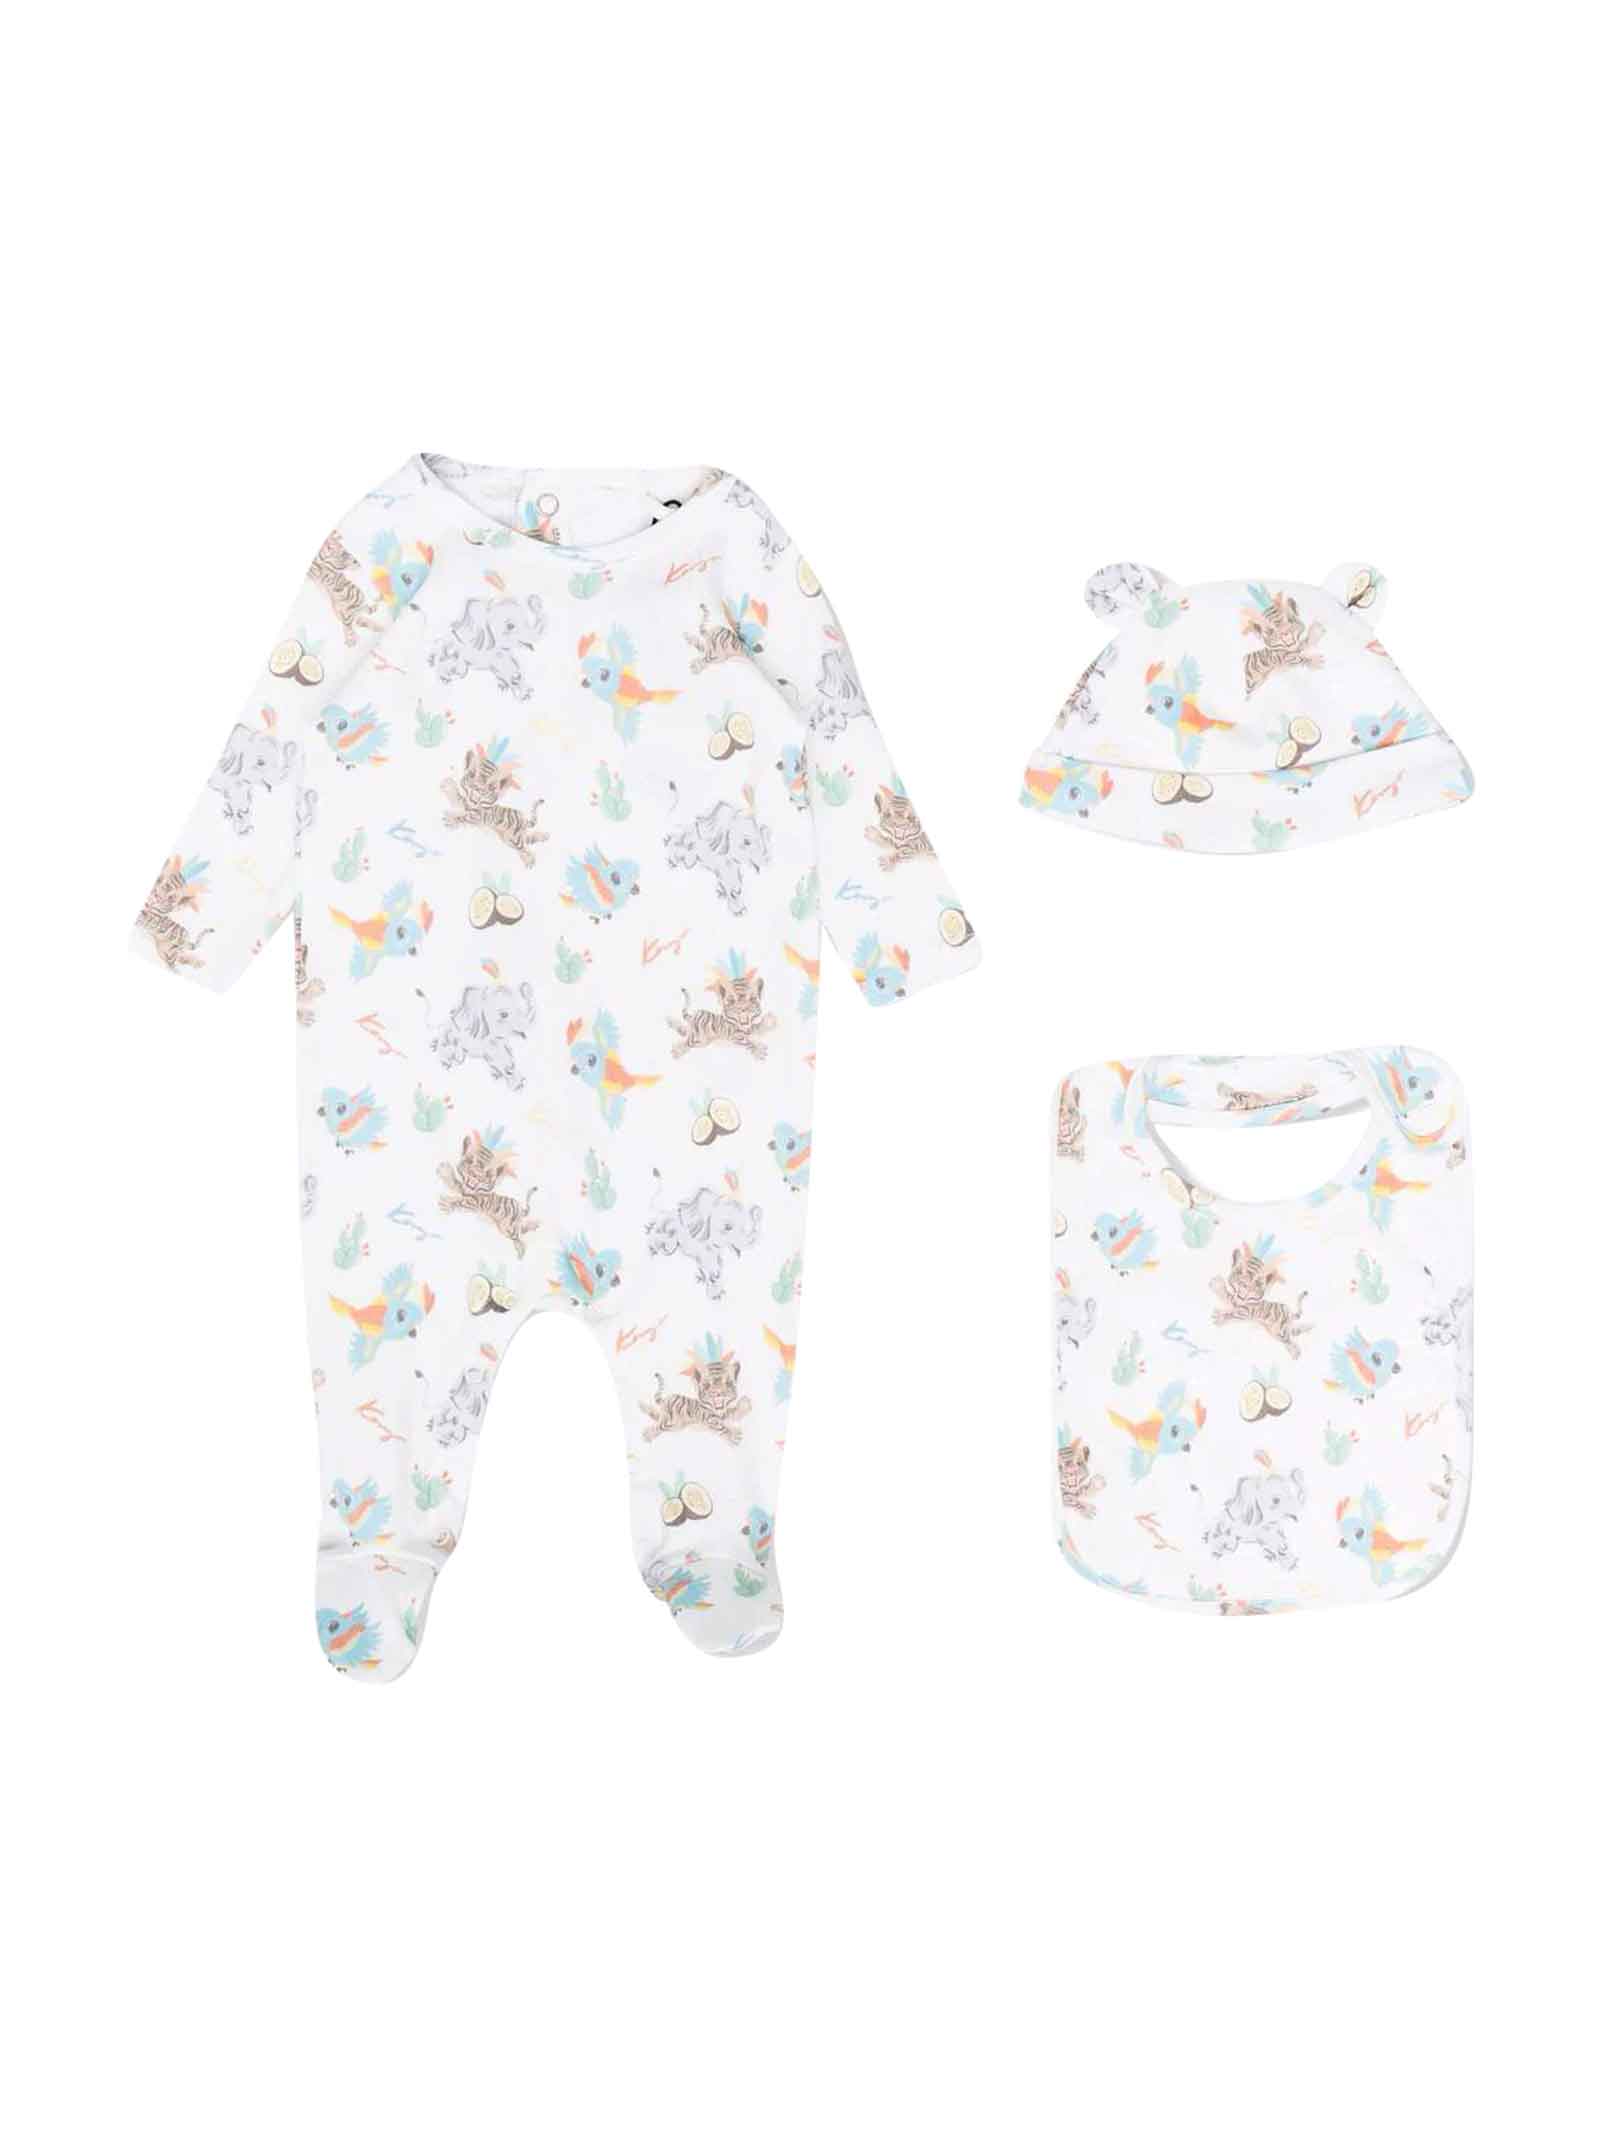 Kenzo Kids White Baby Girl Set, Romper, Hat And Bib With All-over Print Of Different Animals, Round Neck And Long Sleeves By.